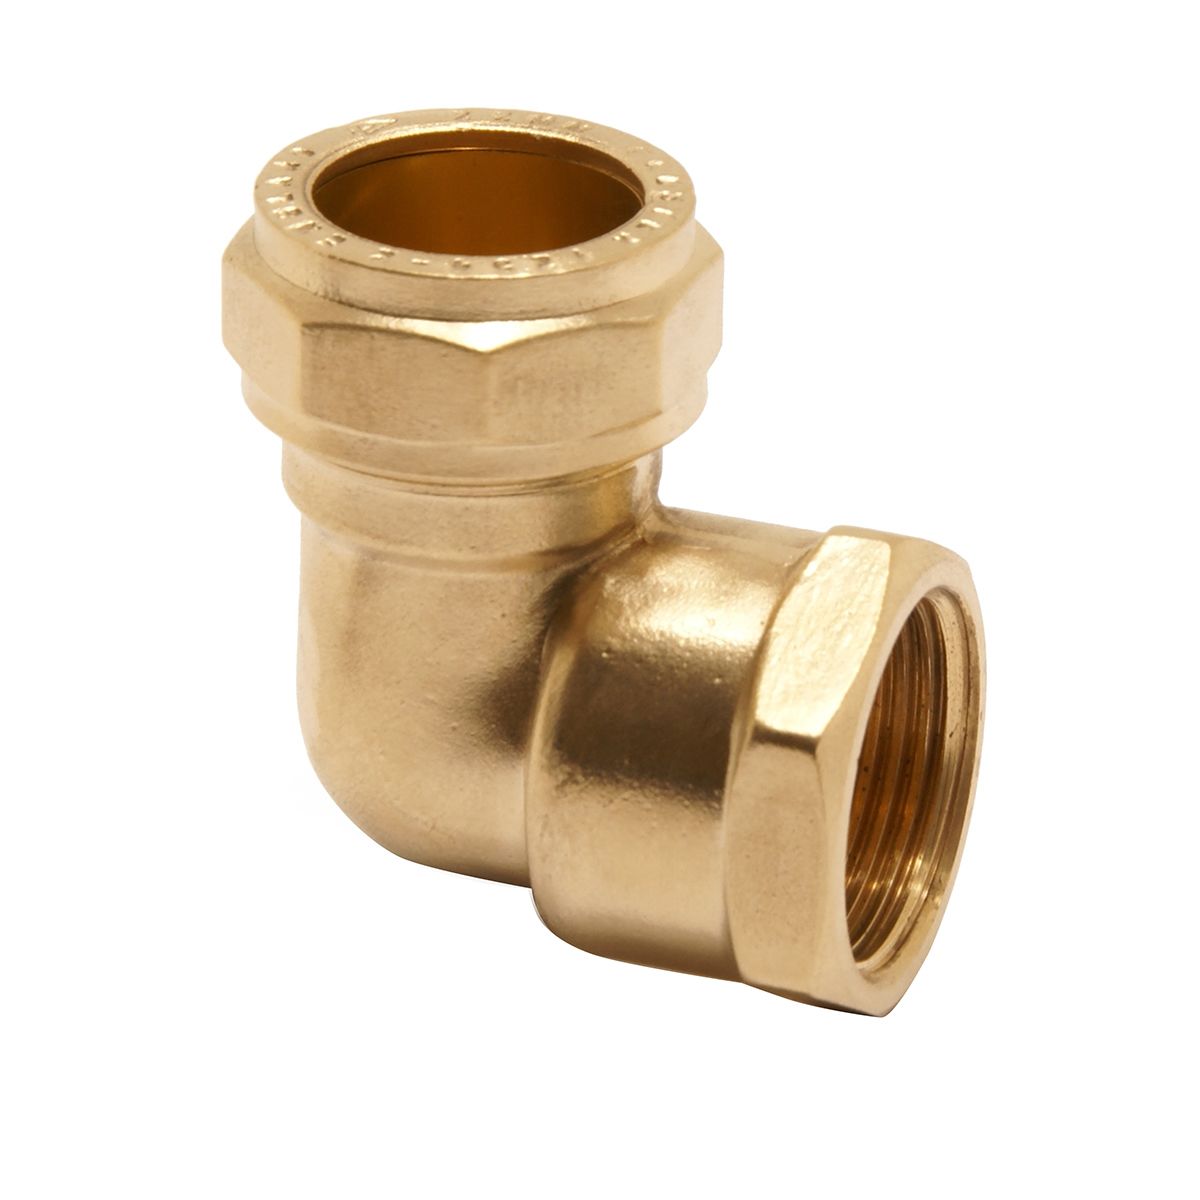 Pegler Yorkshire Brass Compression Fitting, Elbow Coupler